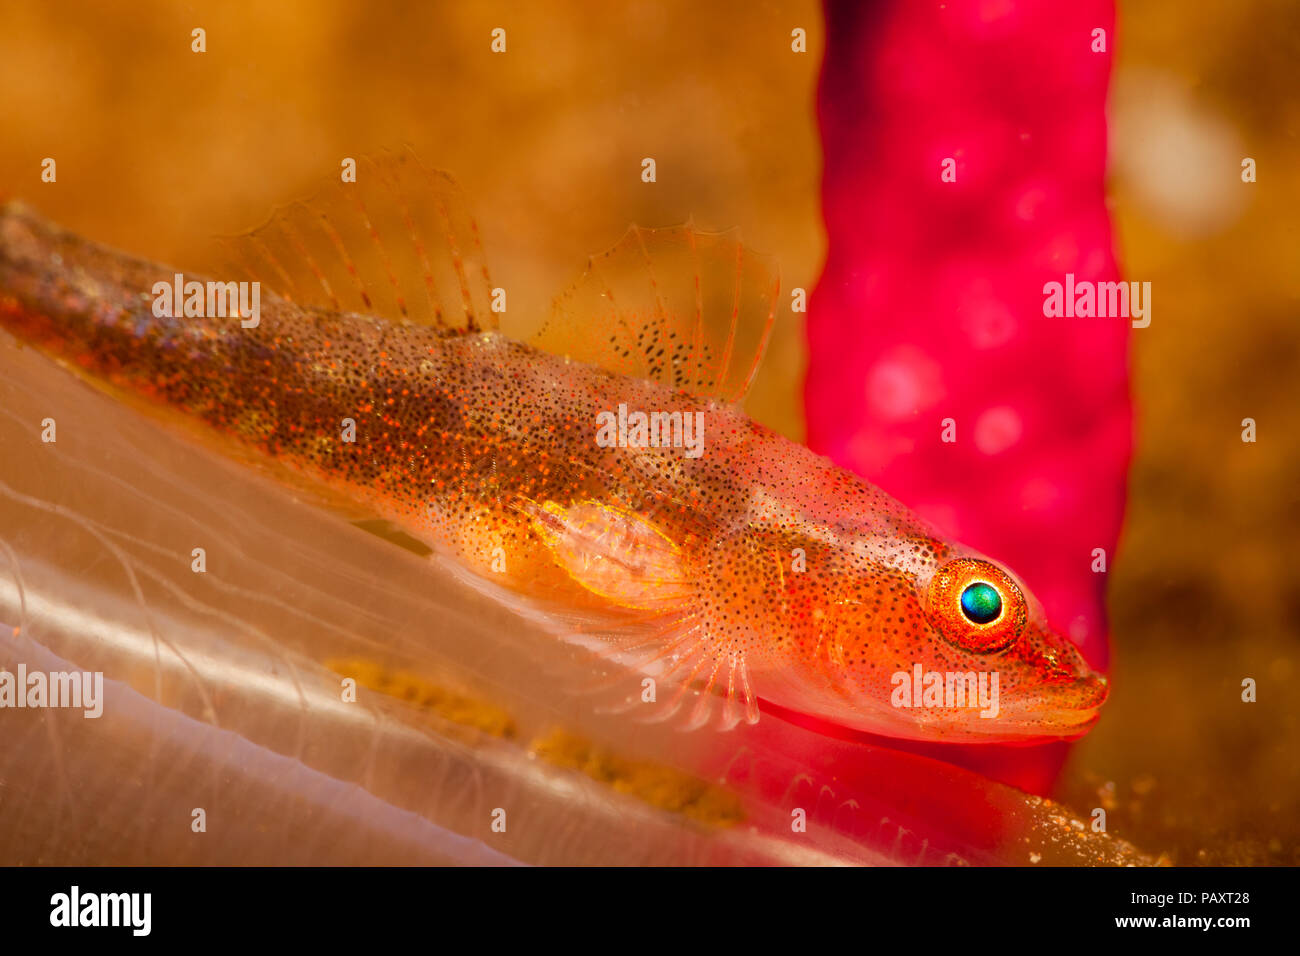 A parasitic copepod is attached just behind the pectoral fin of this coral goby, Bryaninops amplus, Bali, Indonesia. Stock Photo